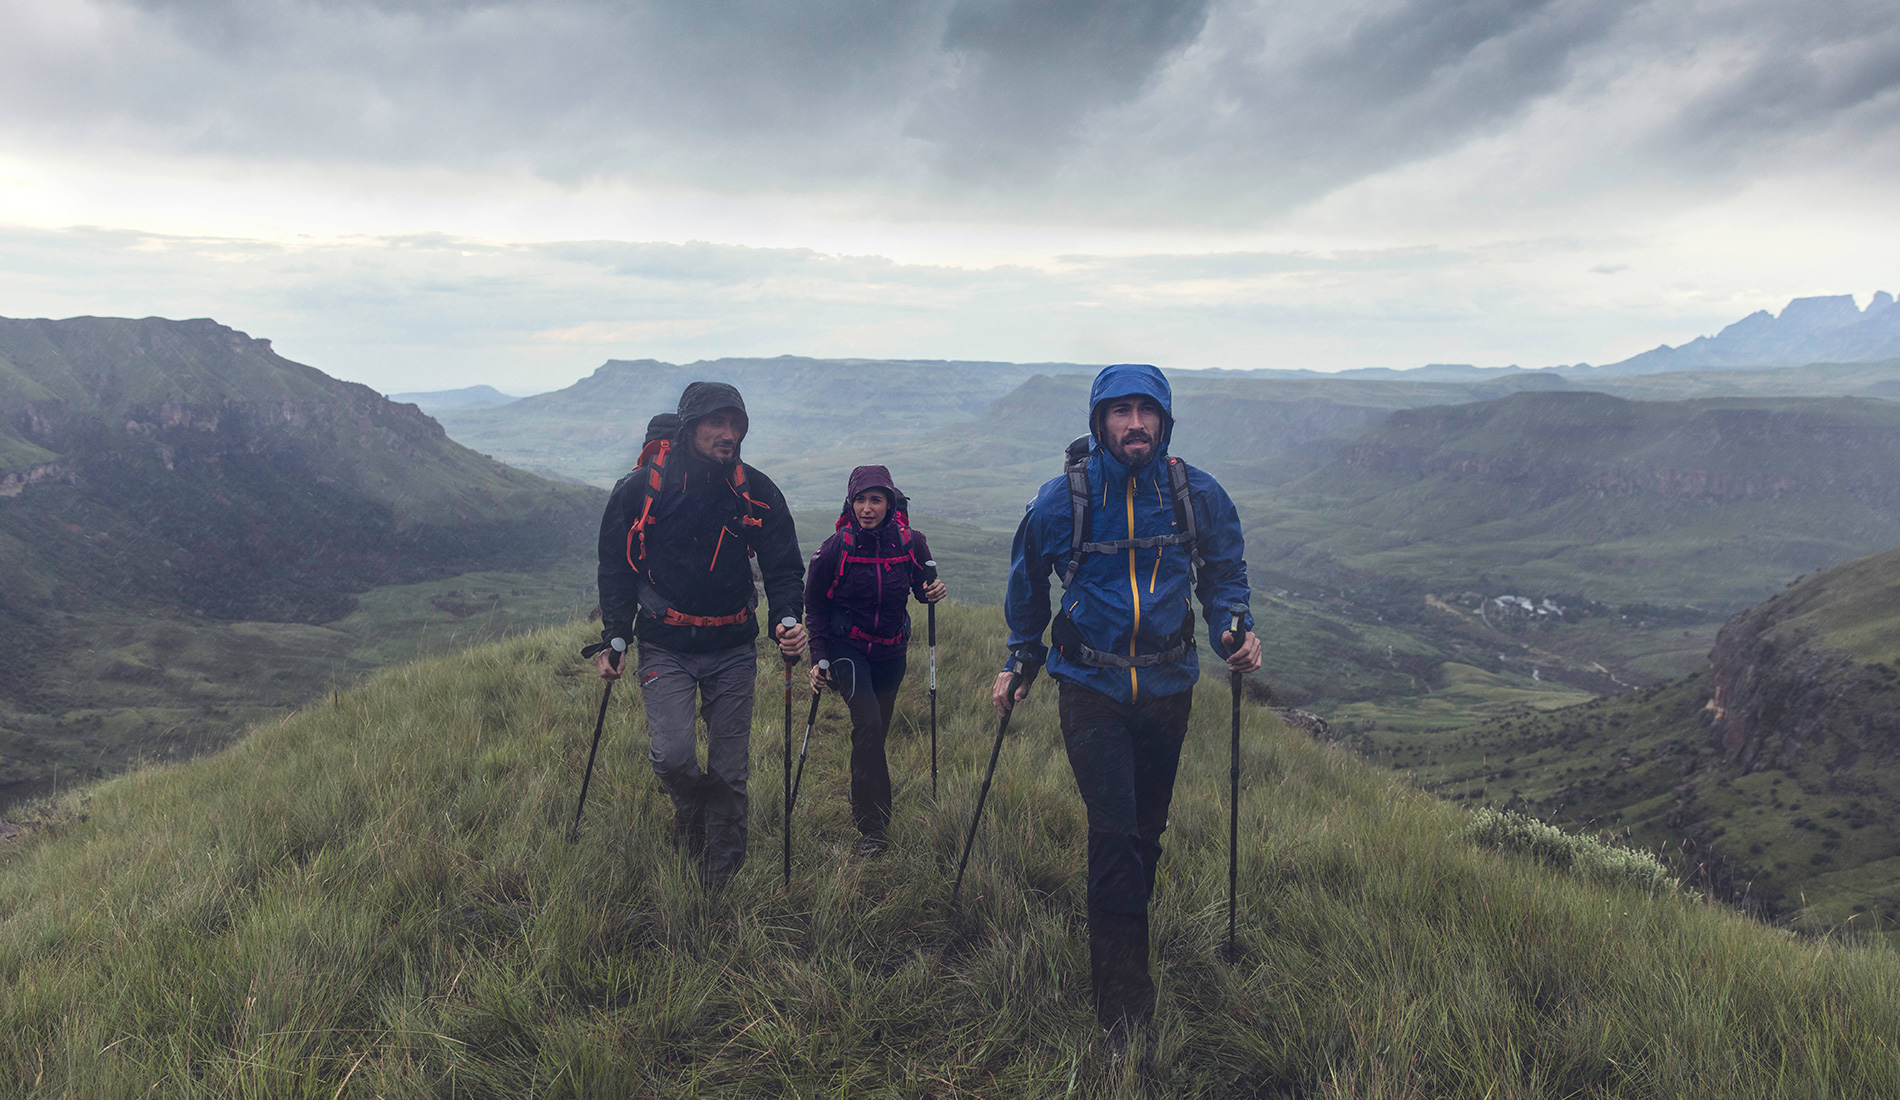 HIKING WITH A PURPOSE – 1 Outdoor Gear Guide